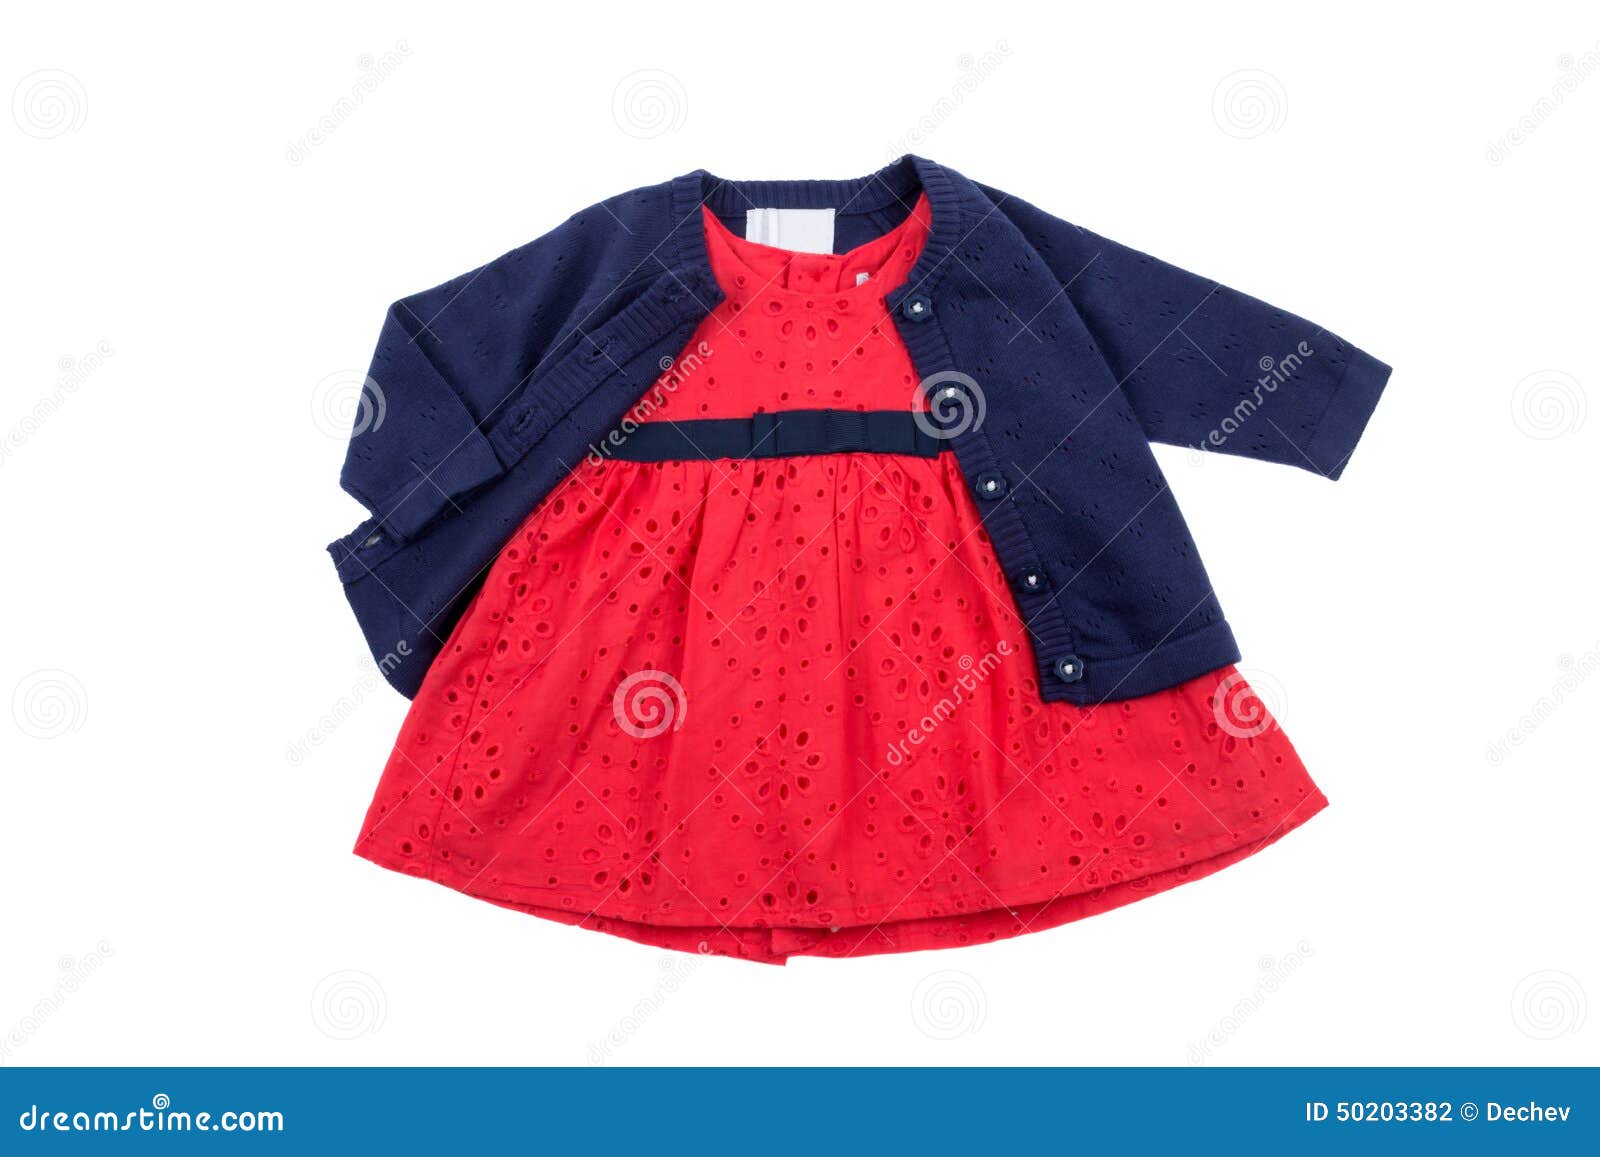 Children S Clothes, for Girl, Isolated Stock Photo - Image of skirt ...